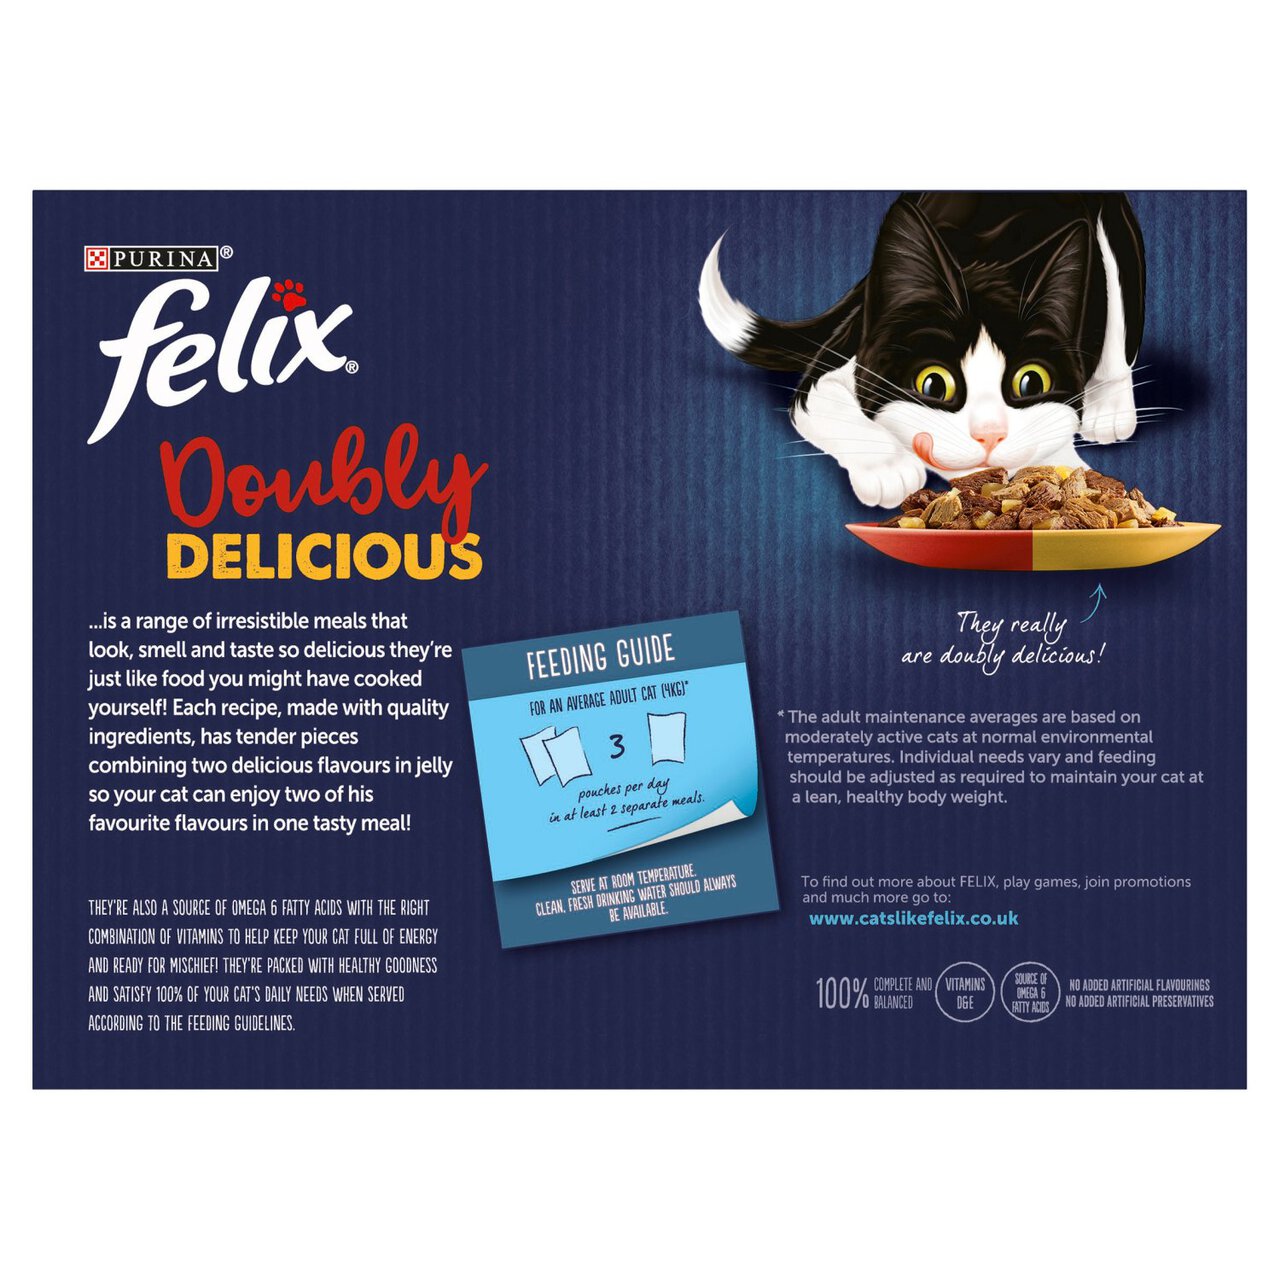 Felix As Good As It Looks Doubly Delicious Cat Food Meat 12 x 100g